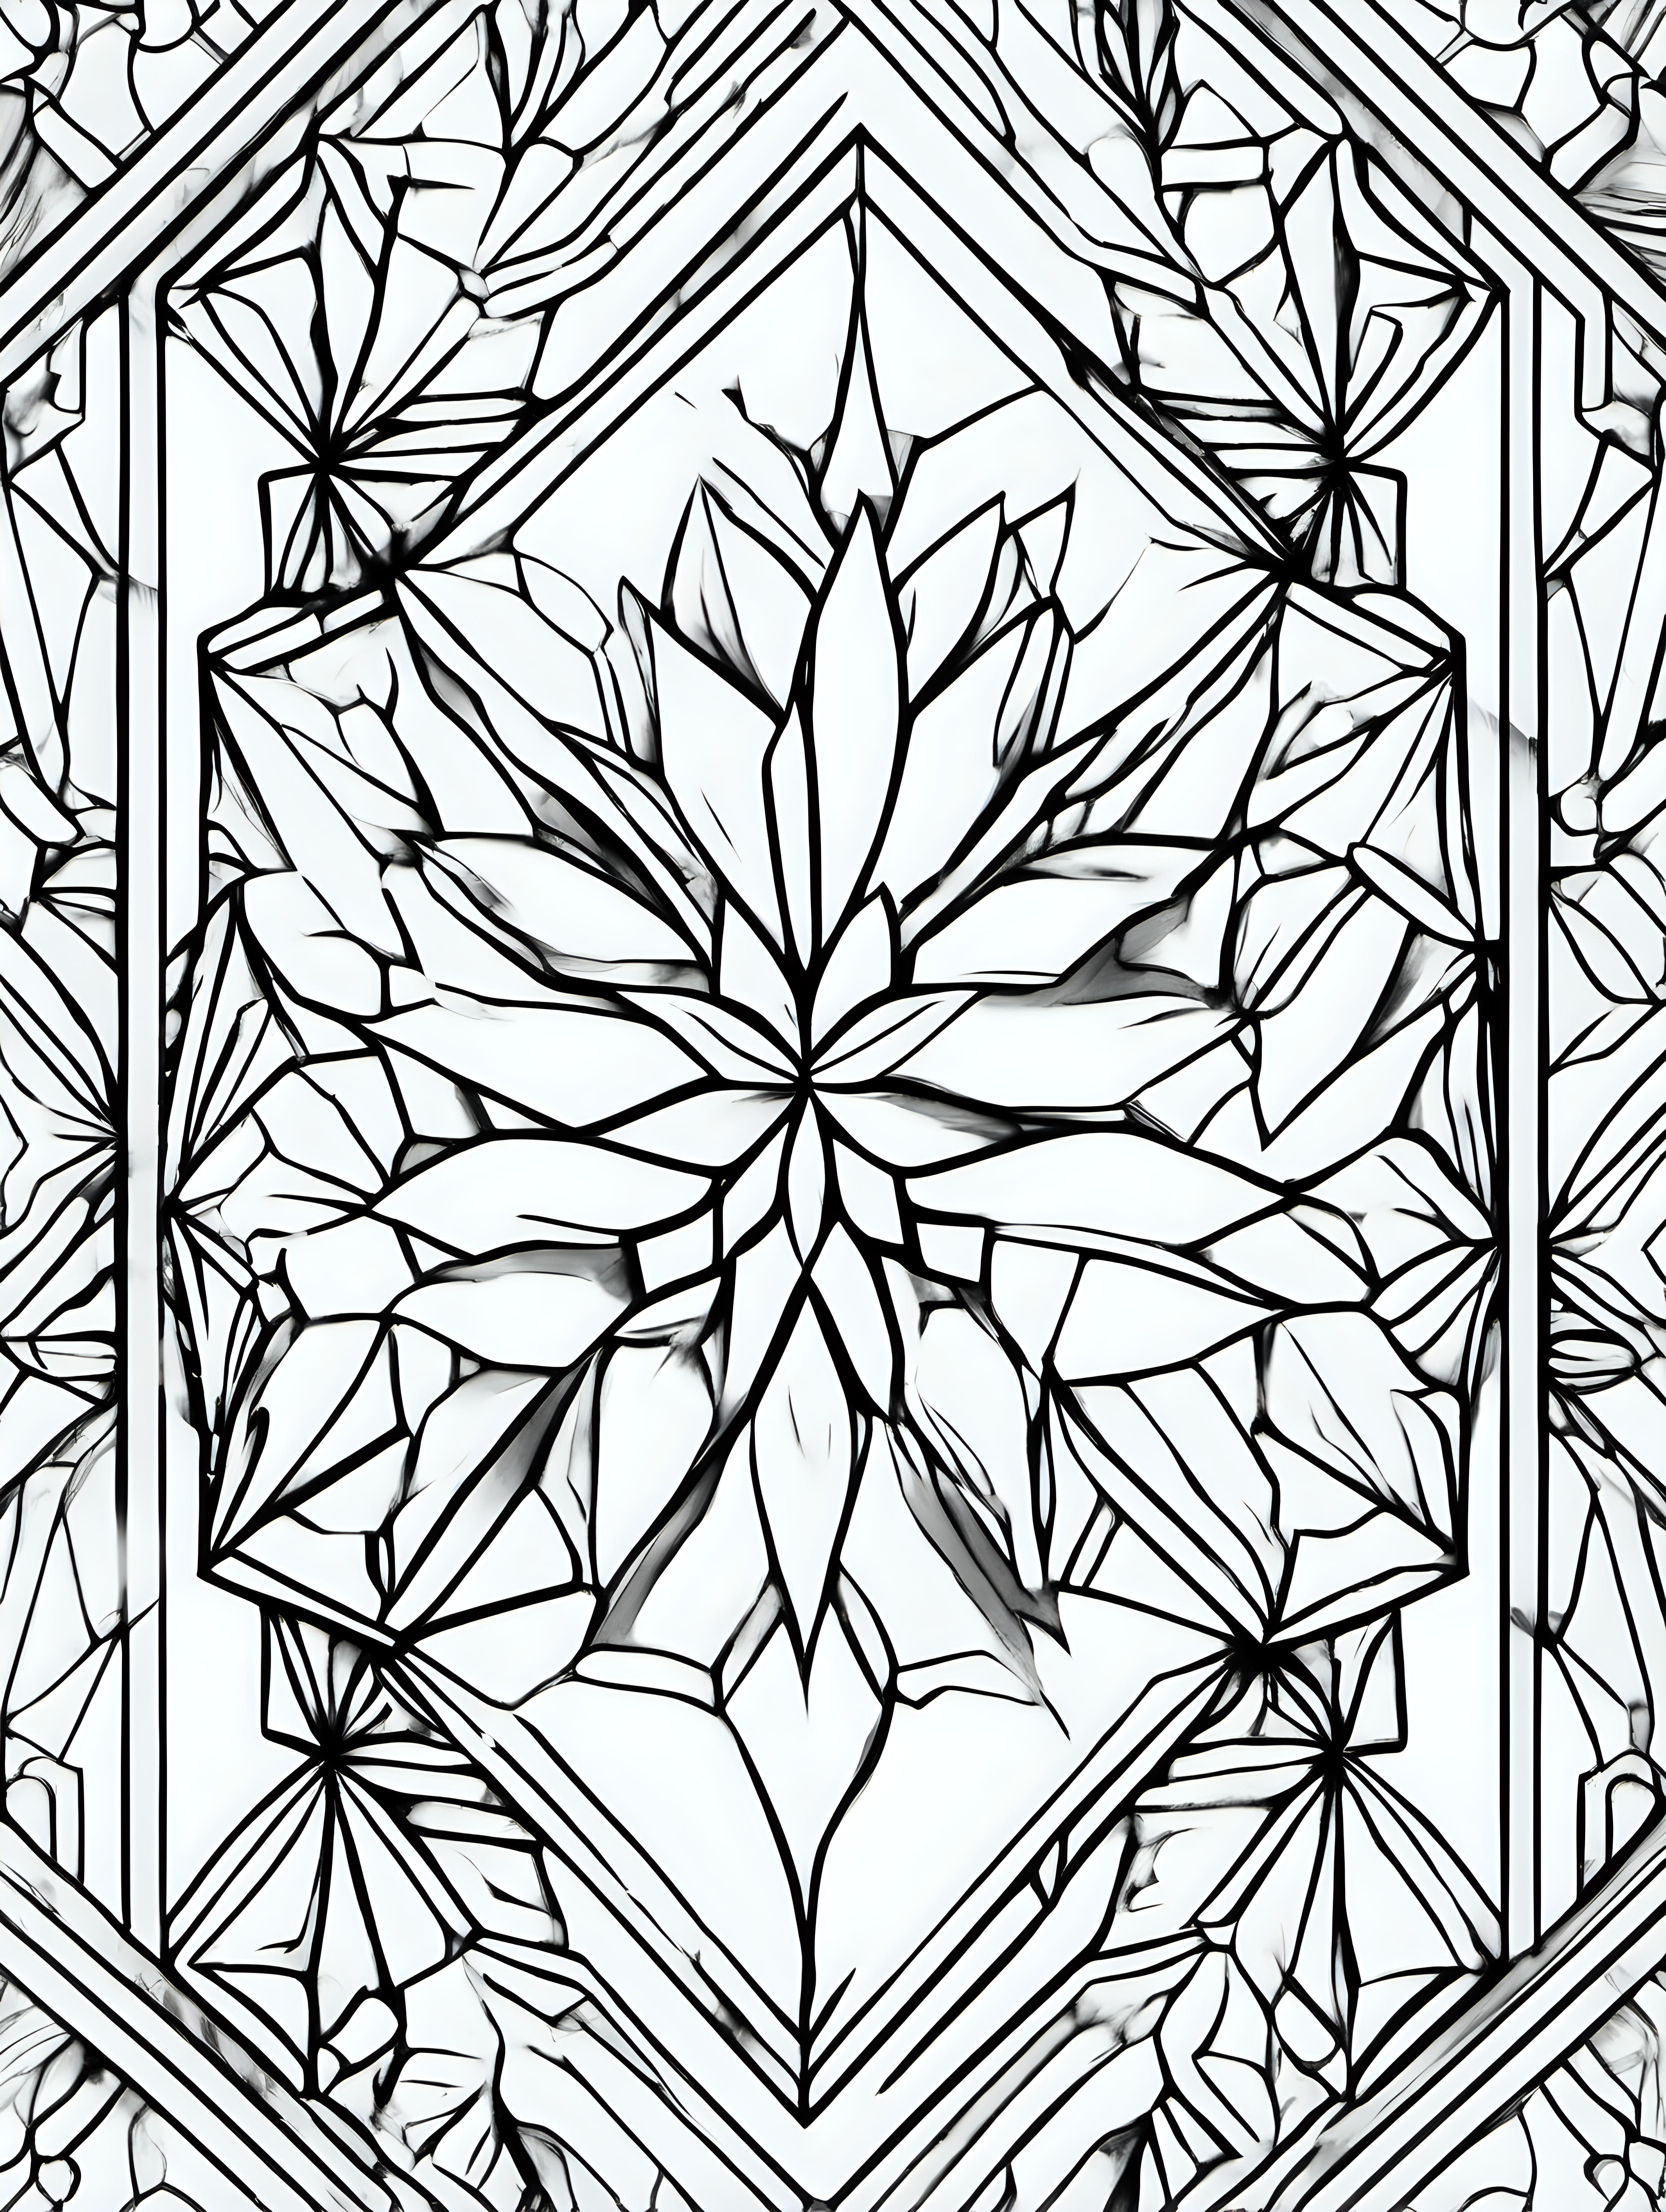 cristal patterns ,coloring page, simple draw, no colors, 